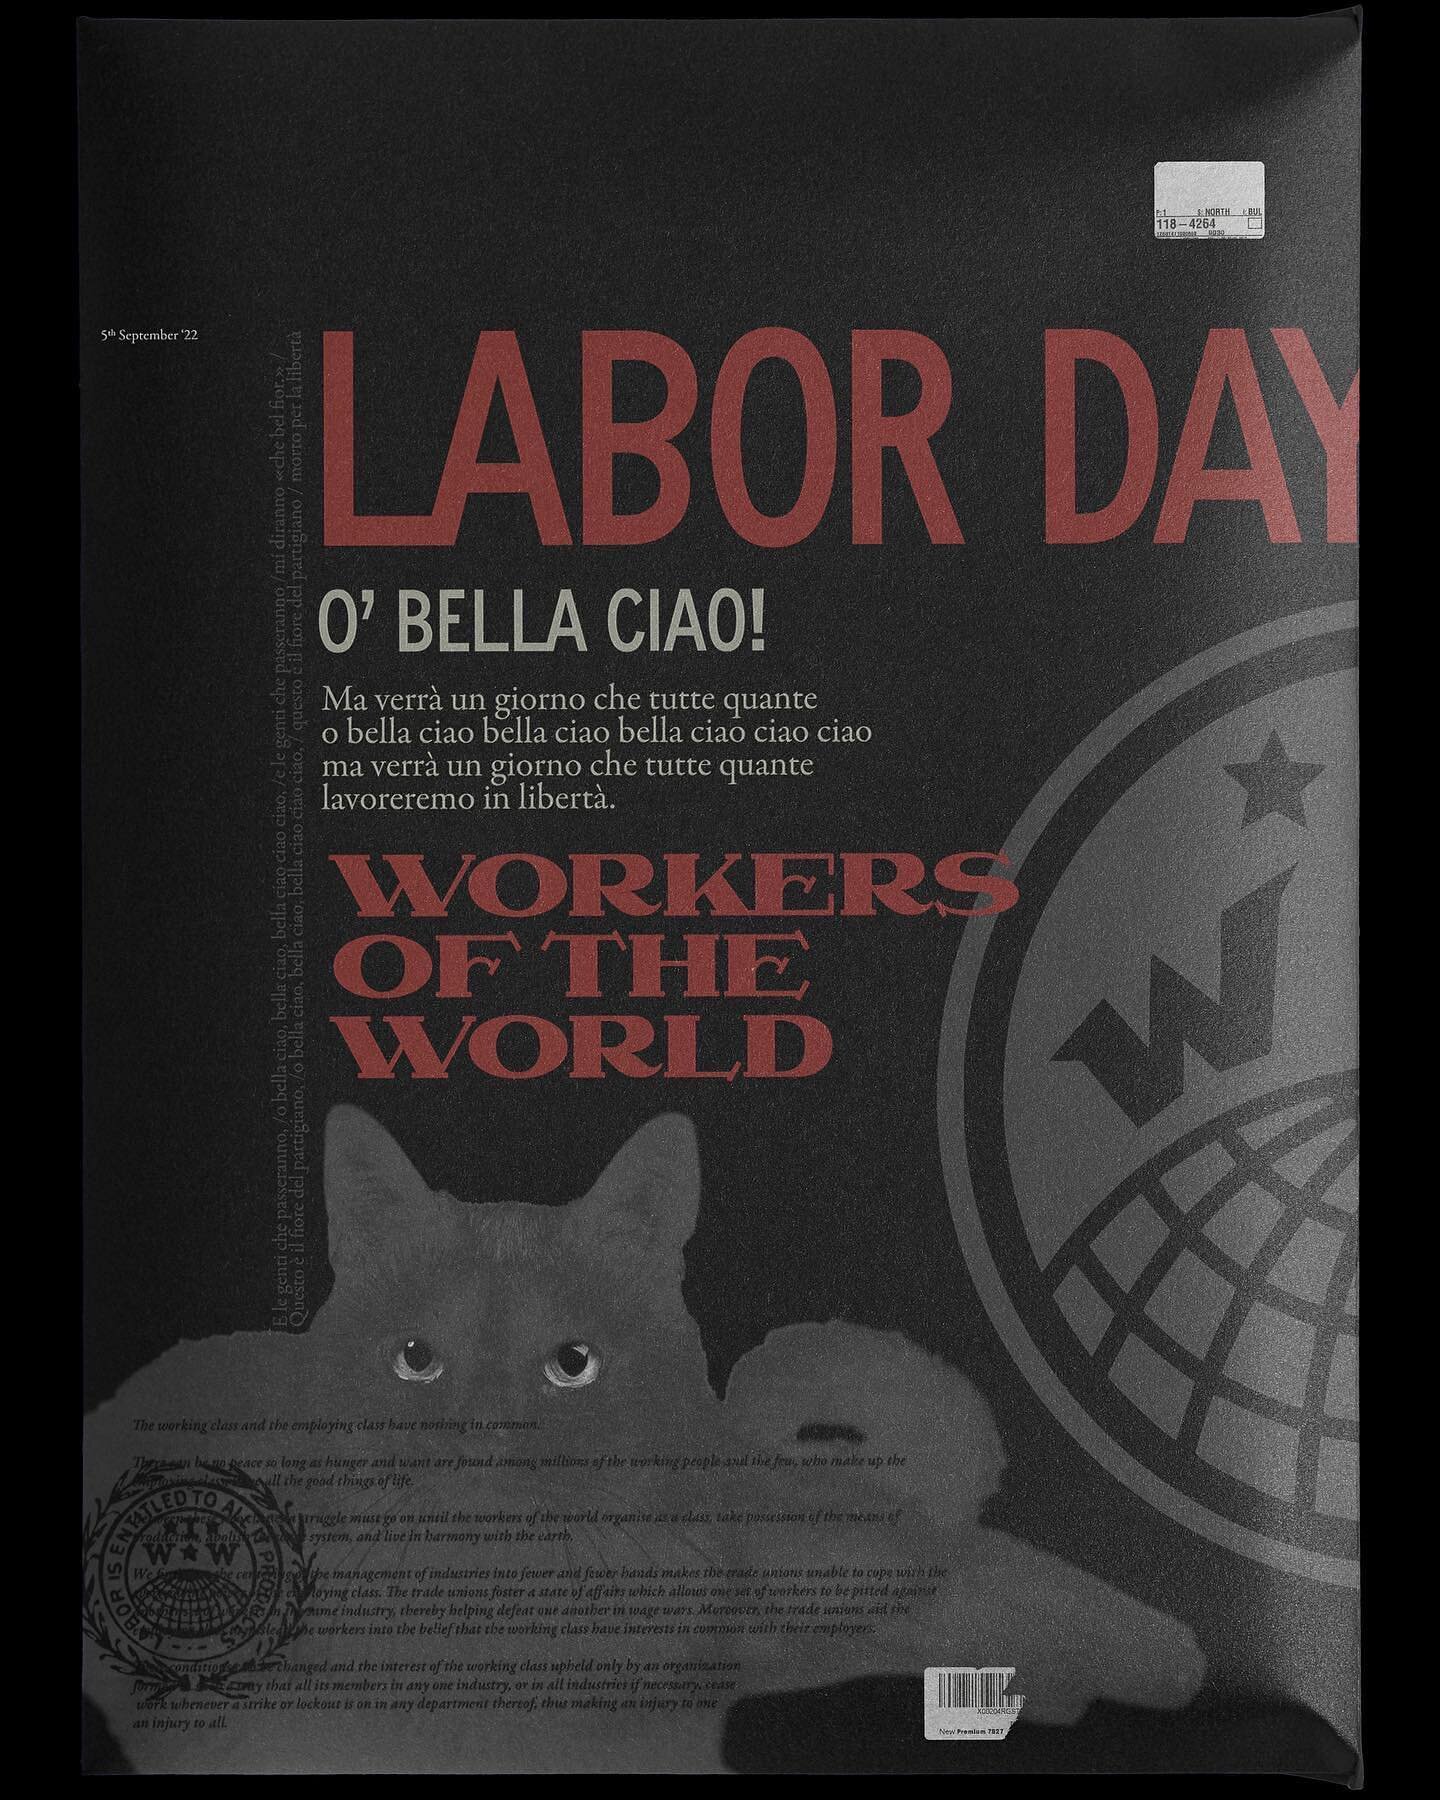 &laquo;𝒜𝓂𝑒𝓇𝒾𝒸𝒶𝓃 𝓂𝒶𝓎𝒹𝒶𝓎&raquo; 
&bull;
&bull;
&bull;
[black background with vertical mail package/magazine cover in grey (@blkmarket mock-up!) with the text &quot;LABOR DAY&quot; set in crimson as the 'Magazine' title, the Y cut off at t